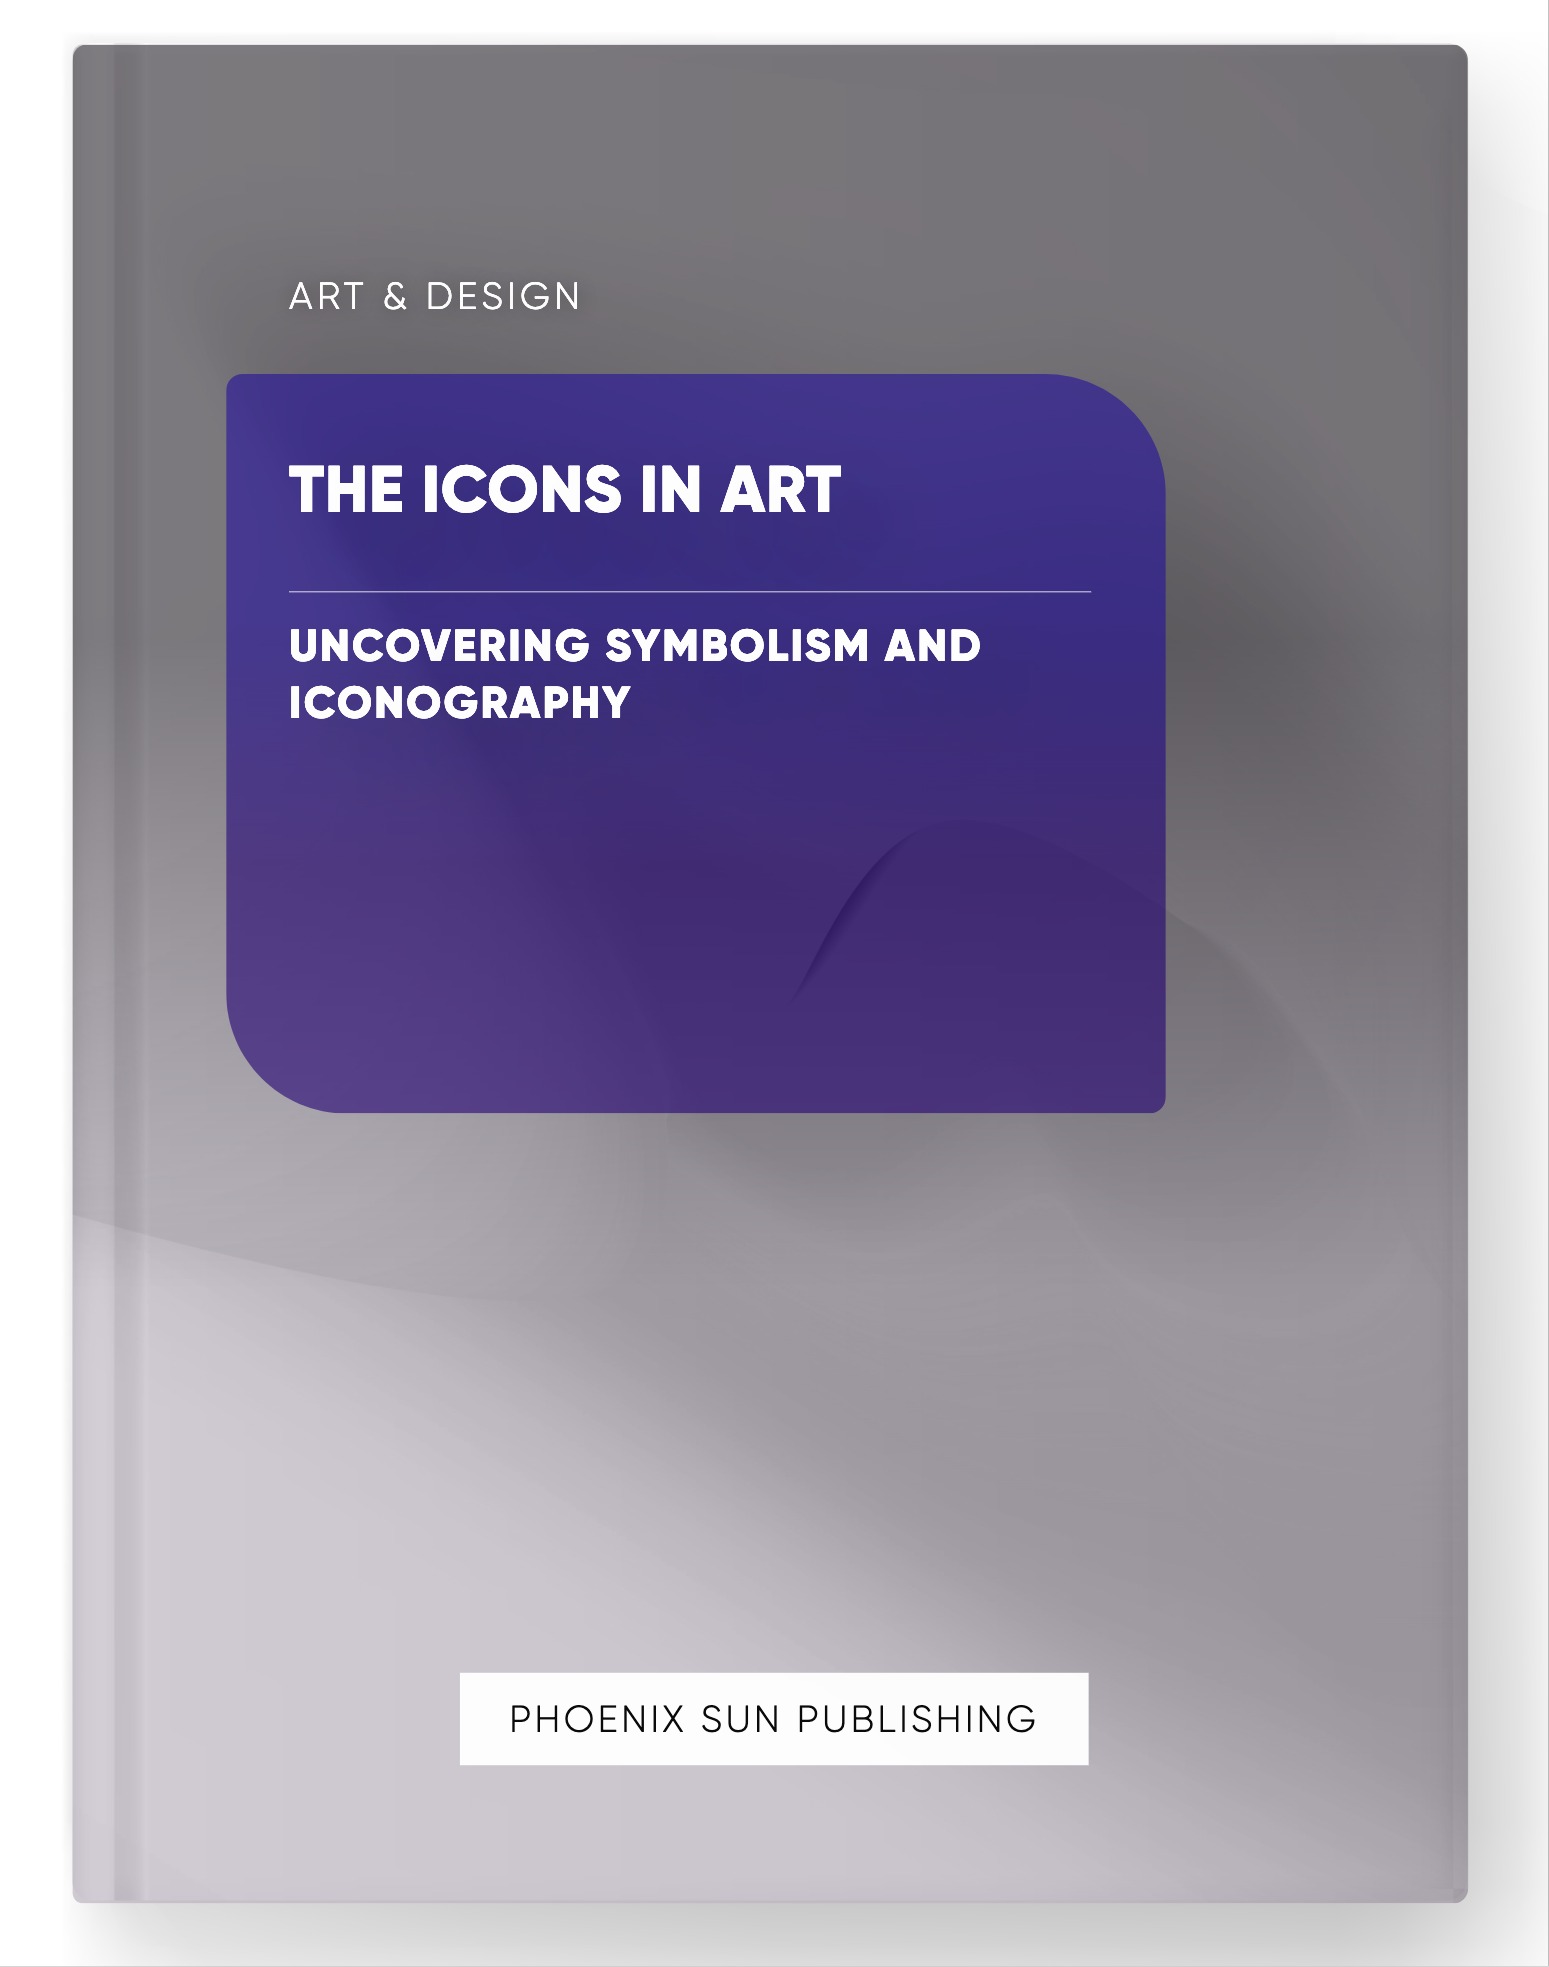 The Icons in Art – Uncovering Symbolism and Iconography